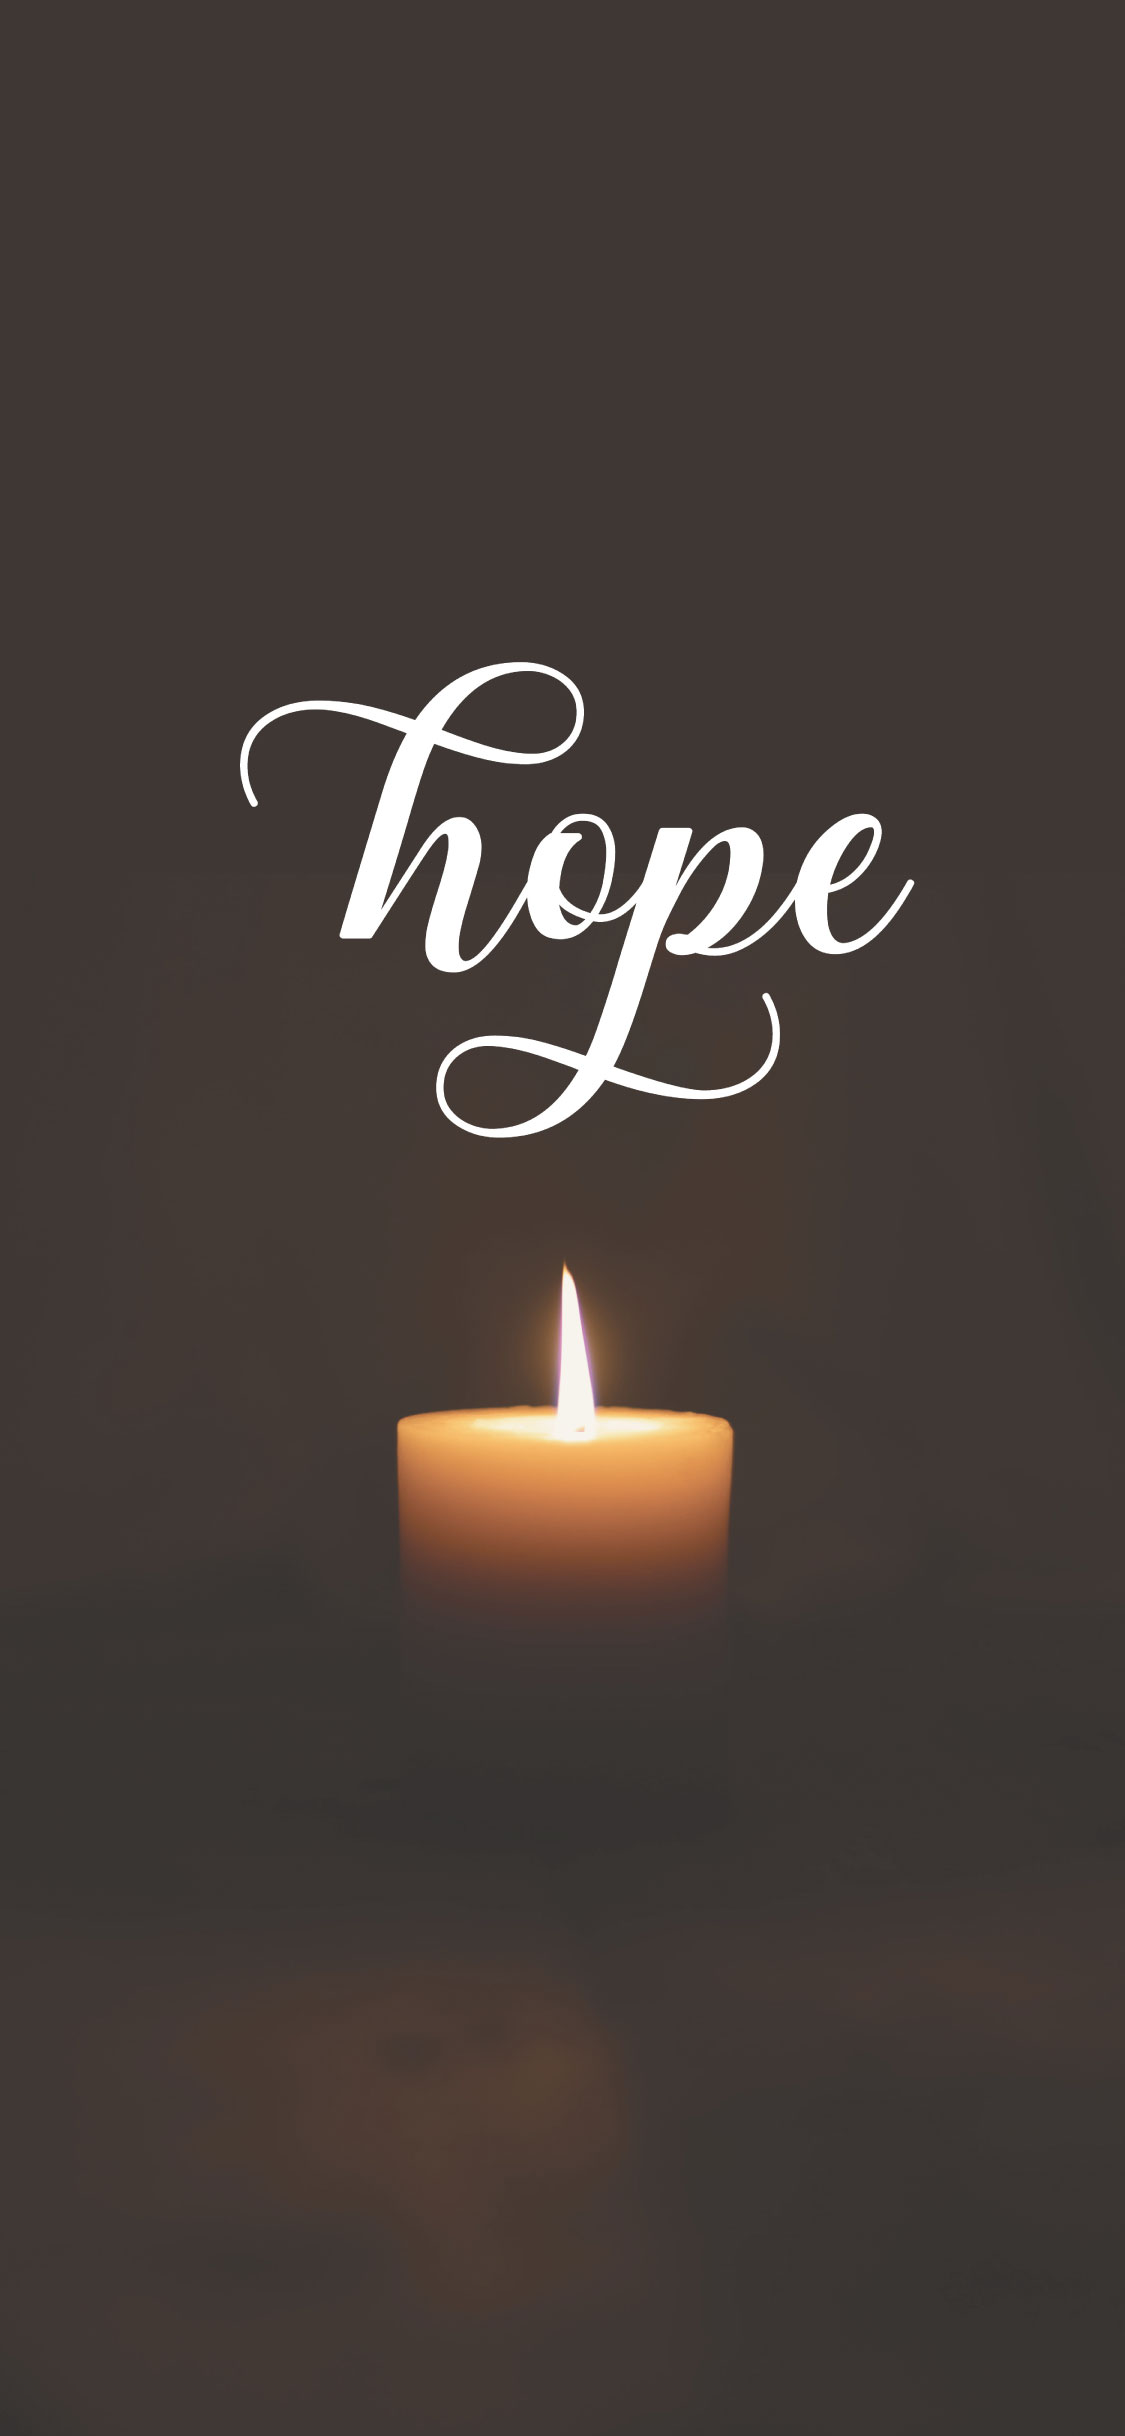 Featured image for “HOPE”